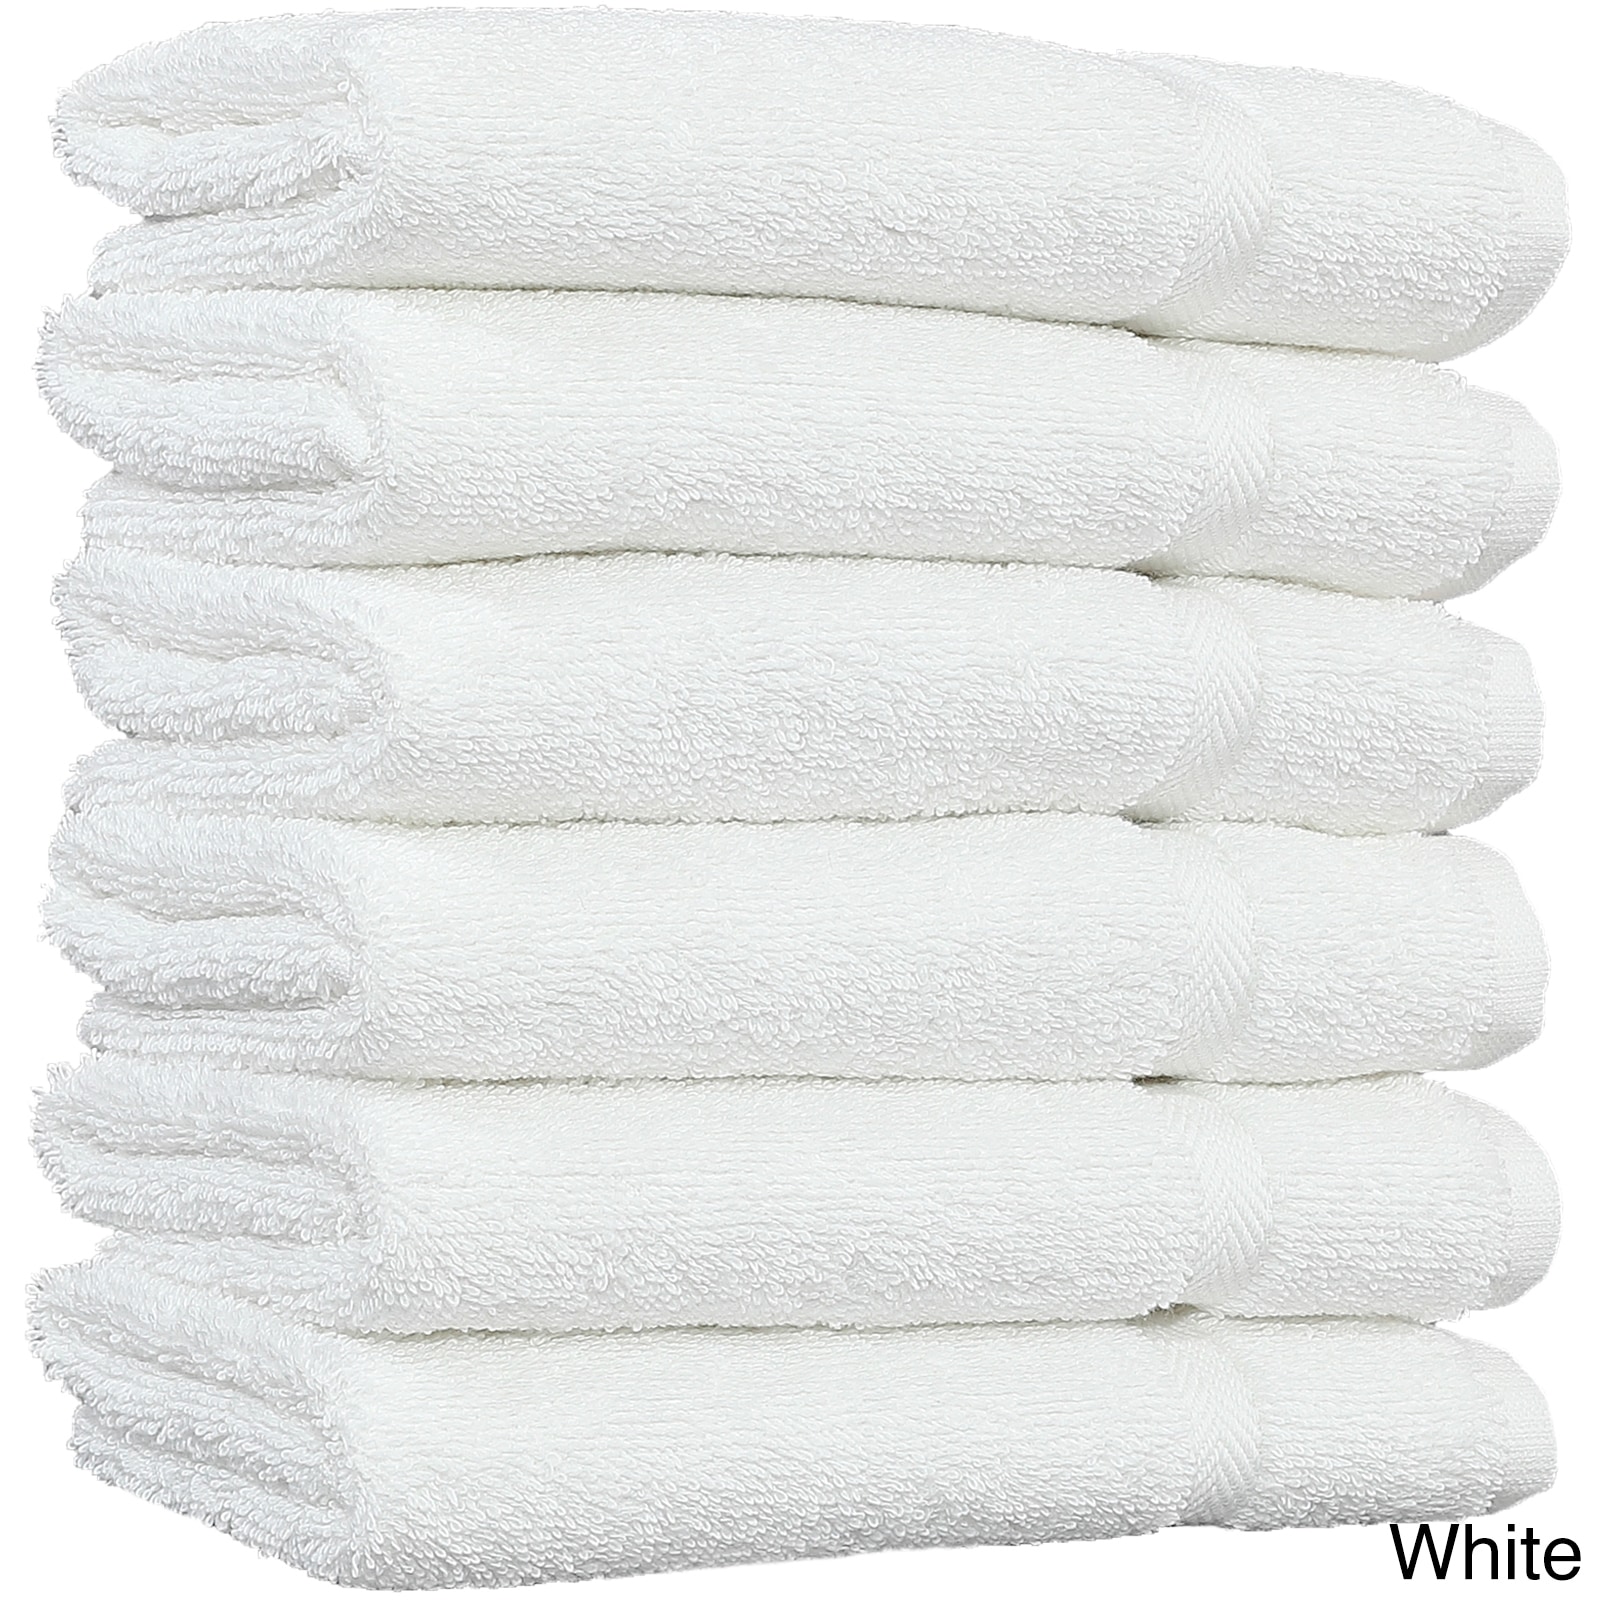 https://ak1.ostkcdn.com/images/products/11090783/Authentic-Hotel-and-Spa-Omni-Turkish-Cotton-Terry-Washcloths-Set-of-6-f6cf68cd-5291-41eb-ba91-a7c50ccff3f1.jpg